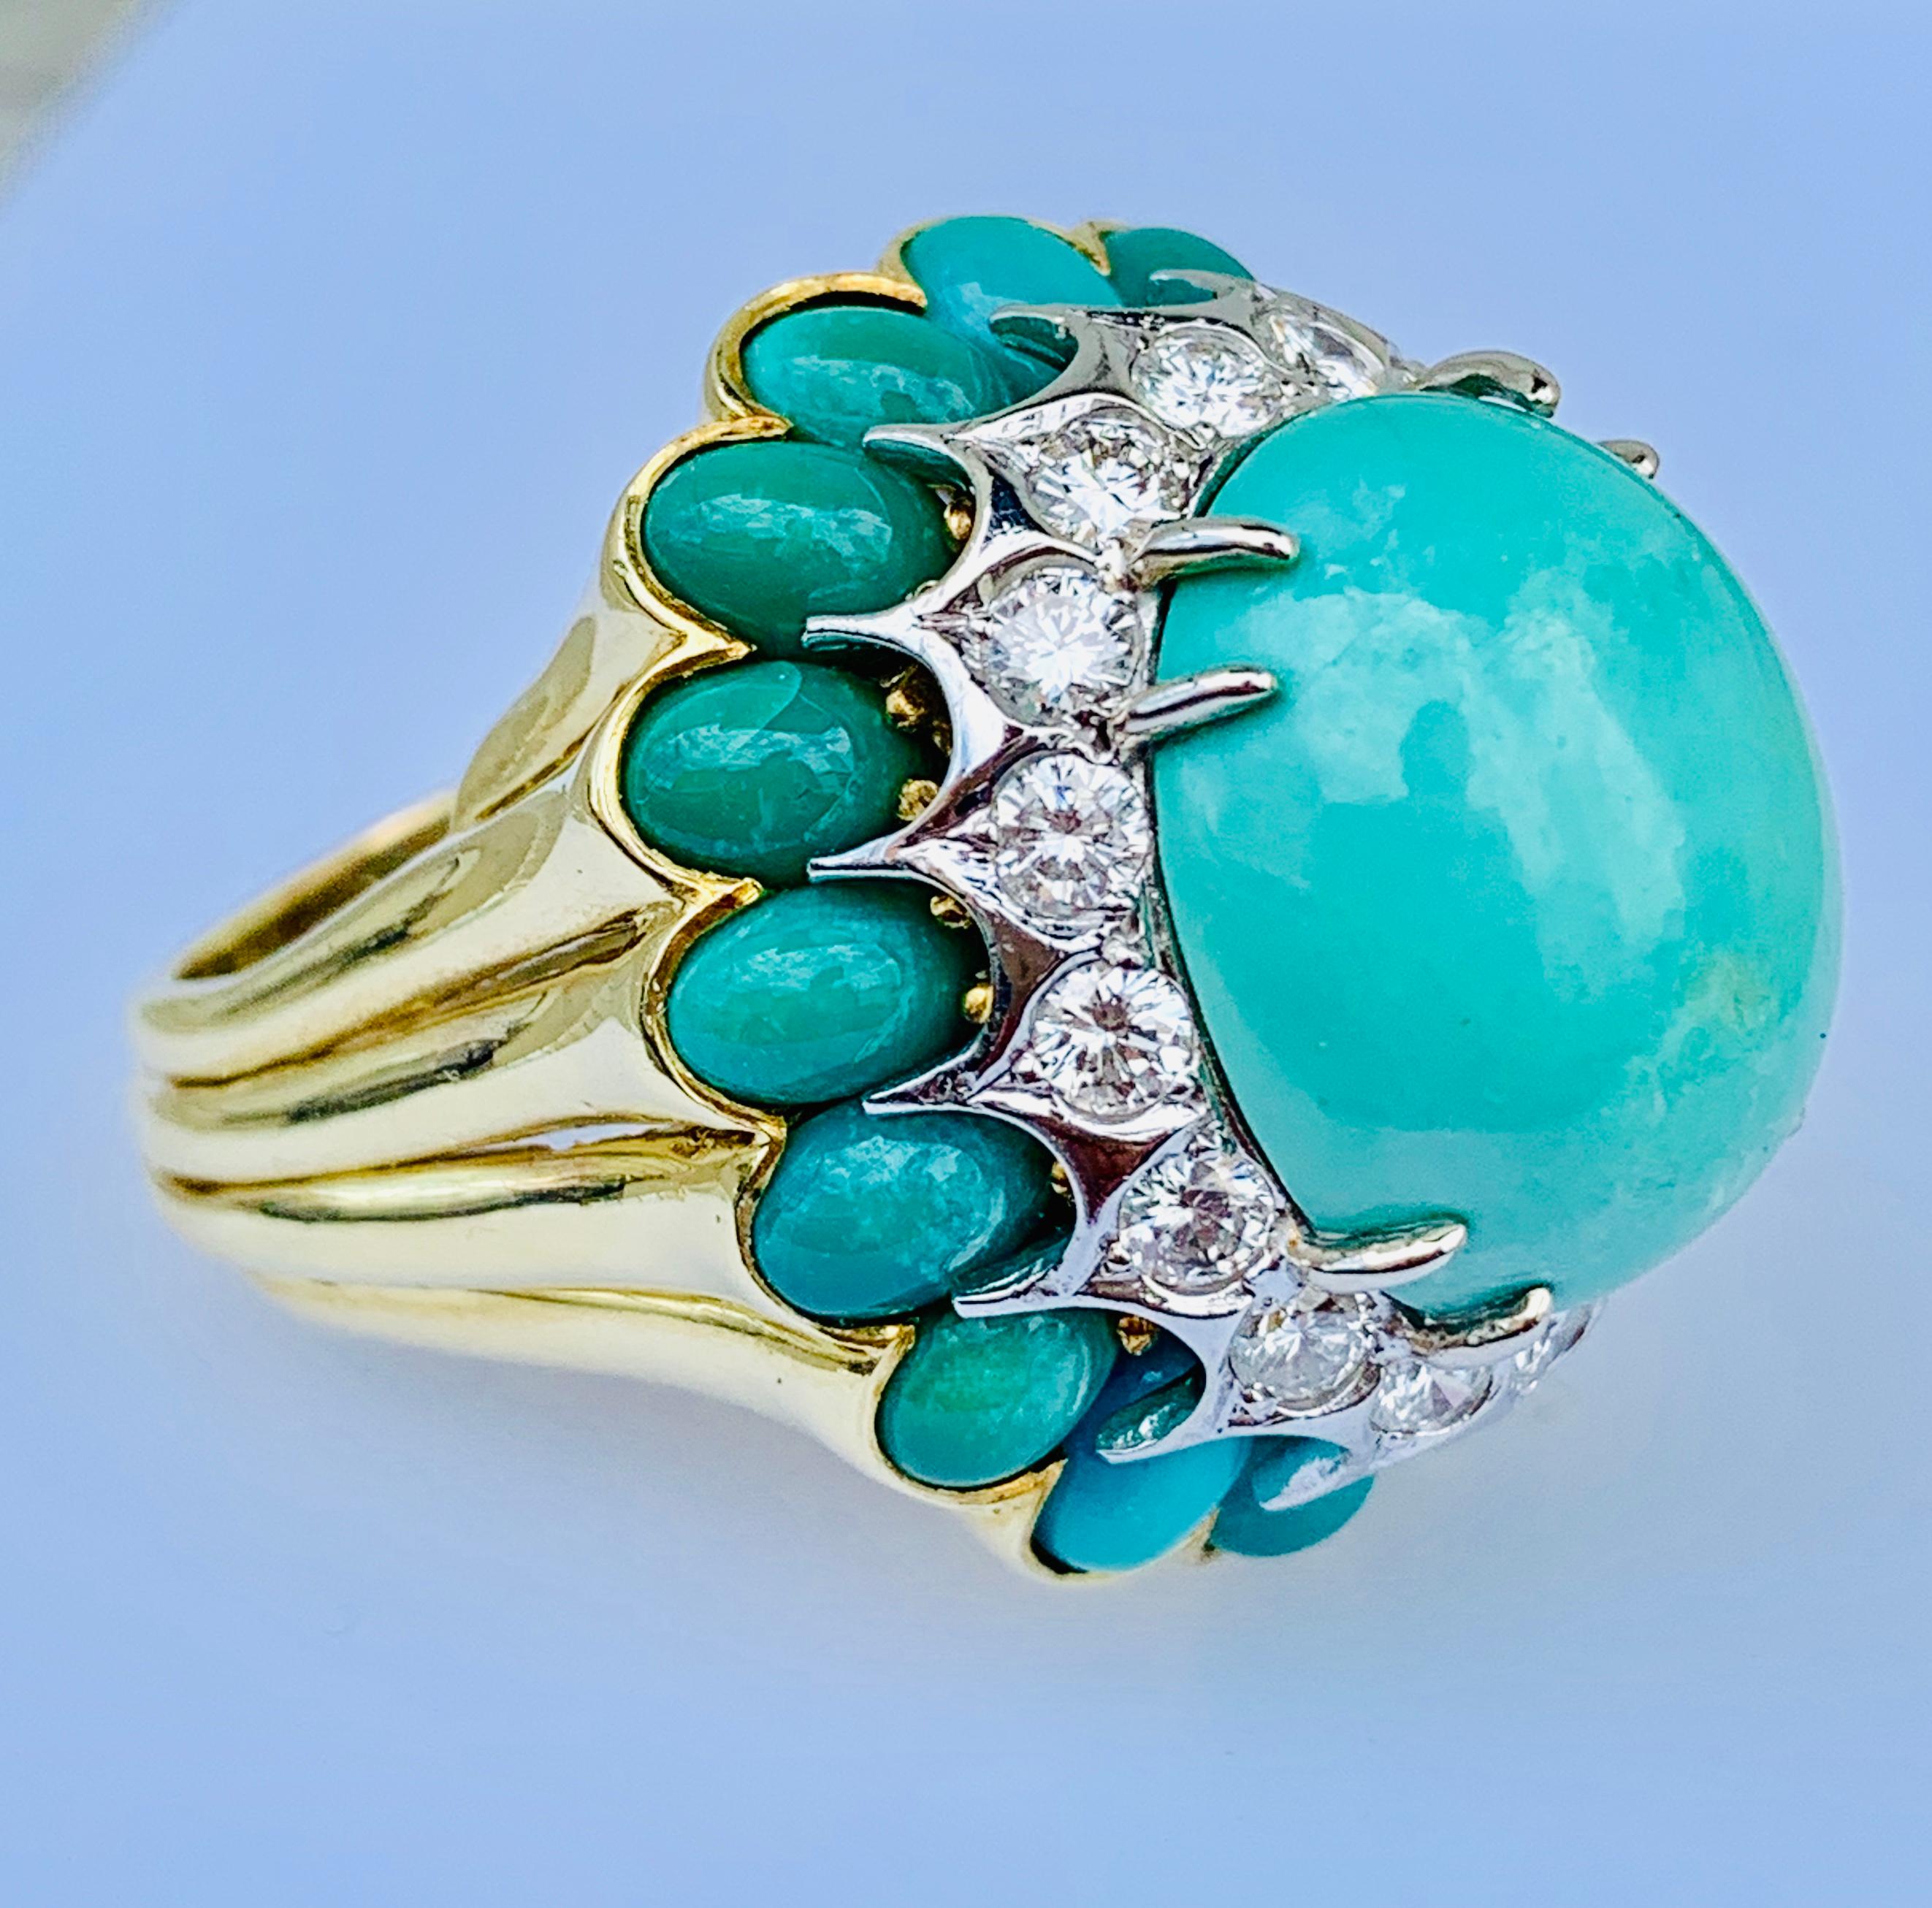 Modernist La Triomphe 18 Karat Yellow Gold, Turquoise and Diamond Dome Ring